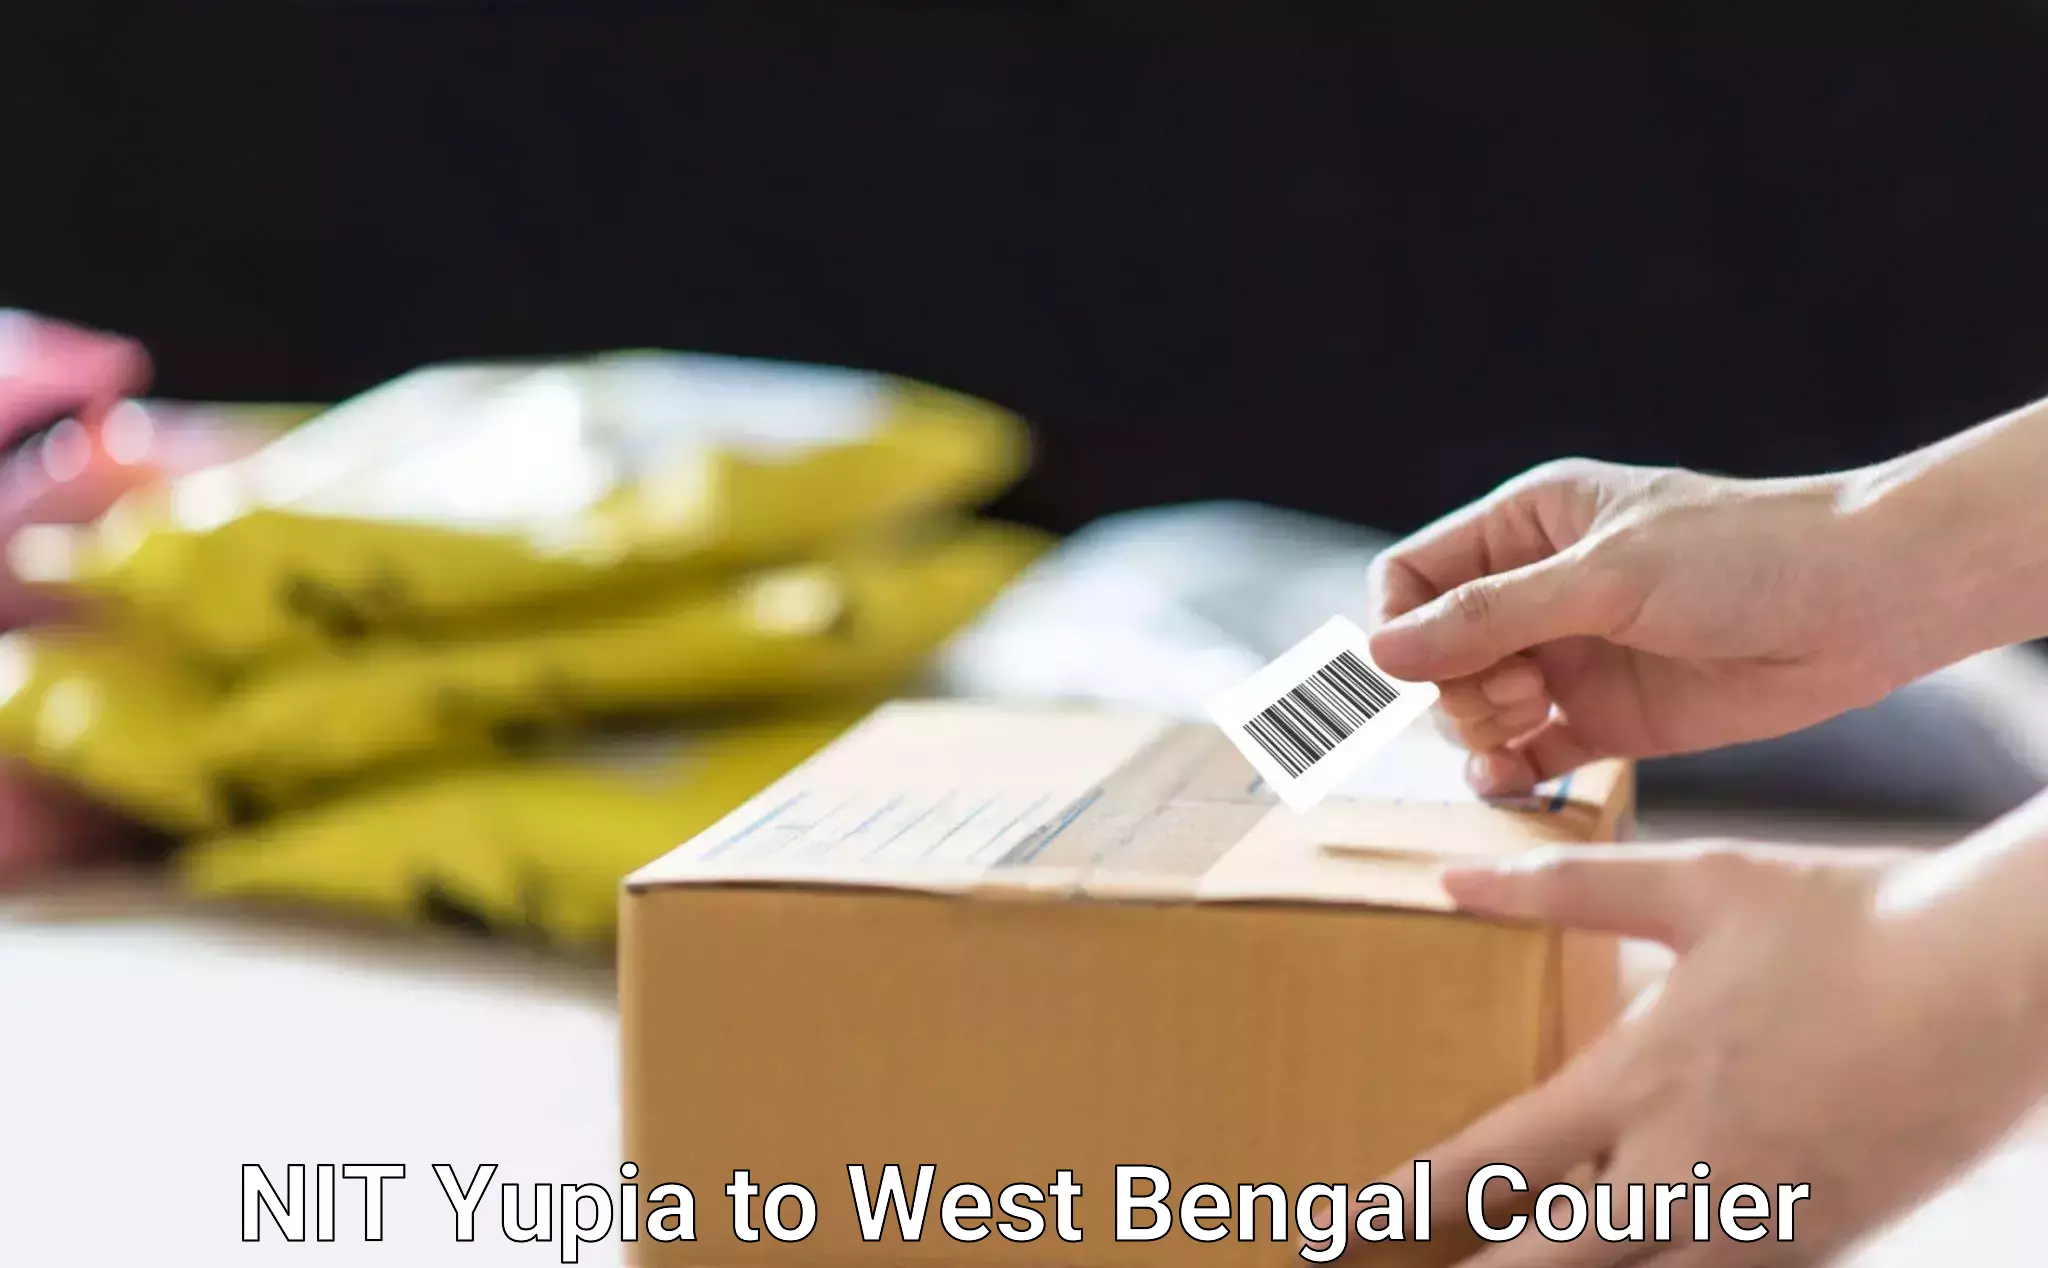 Express delivery network NIT Yupia to West Bengal